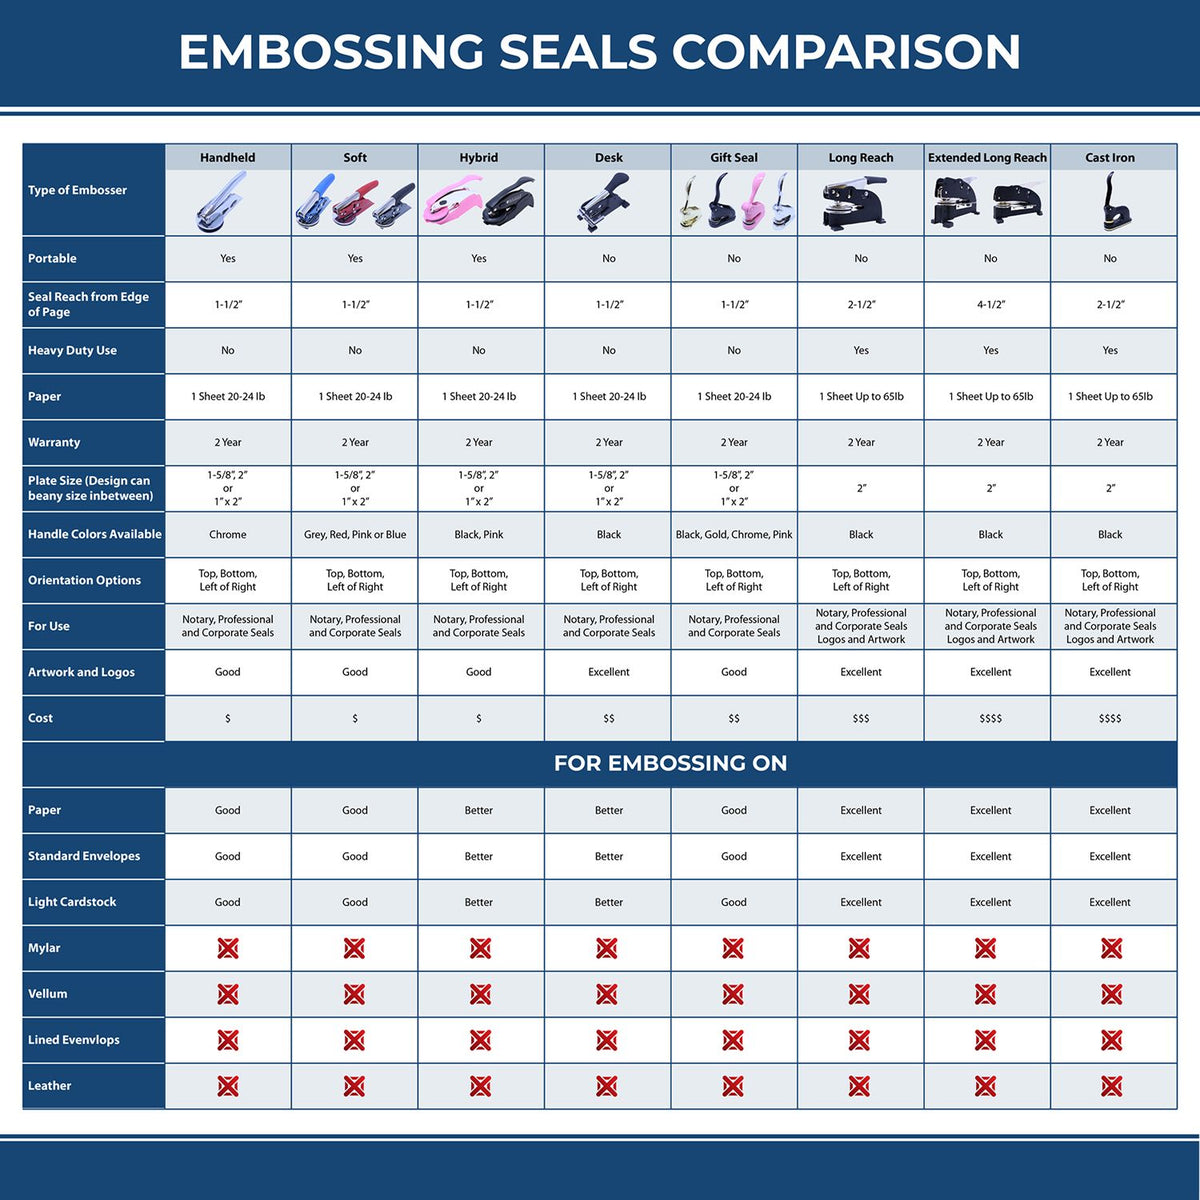 A comparison chart for the different types of mount models available for the State of Delaware Long Reach Architectural Embossing Seal.